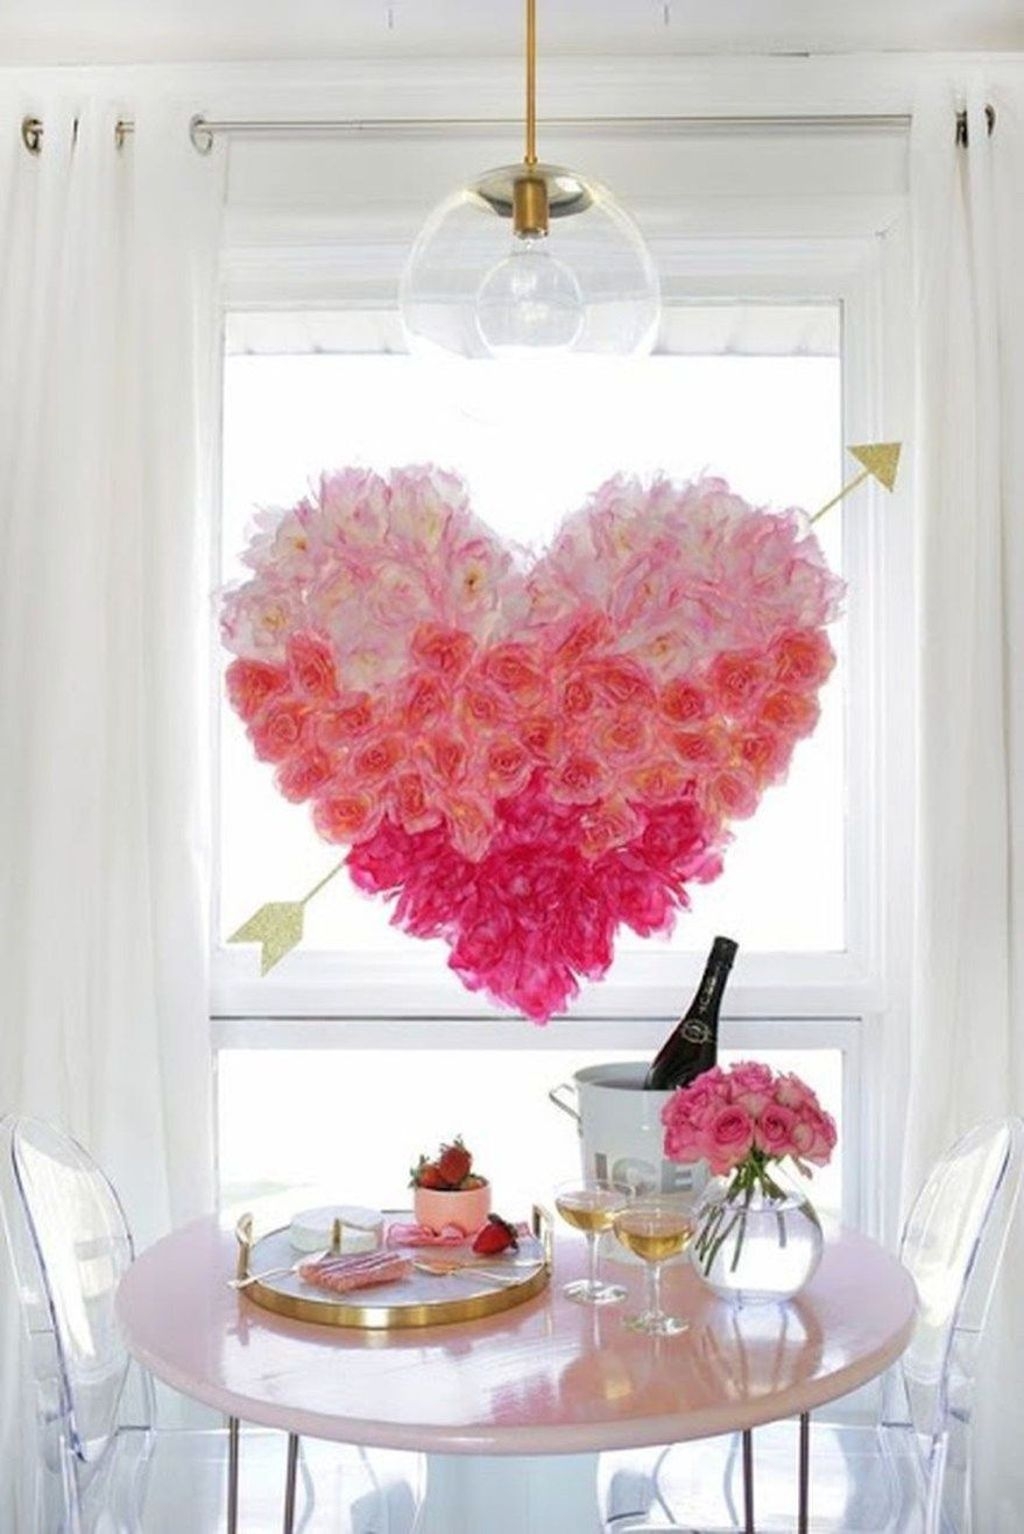 Perfect Valentine’s Day Romantic Dining Table Decor Ideas For Two People 15